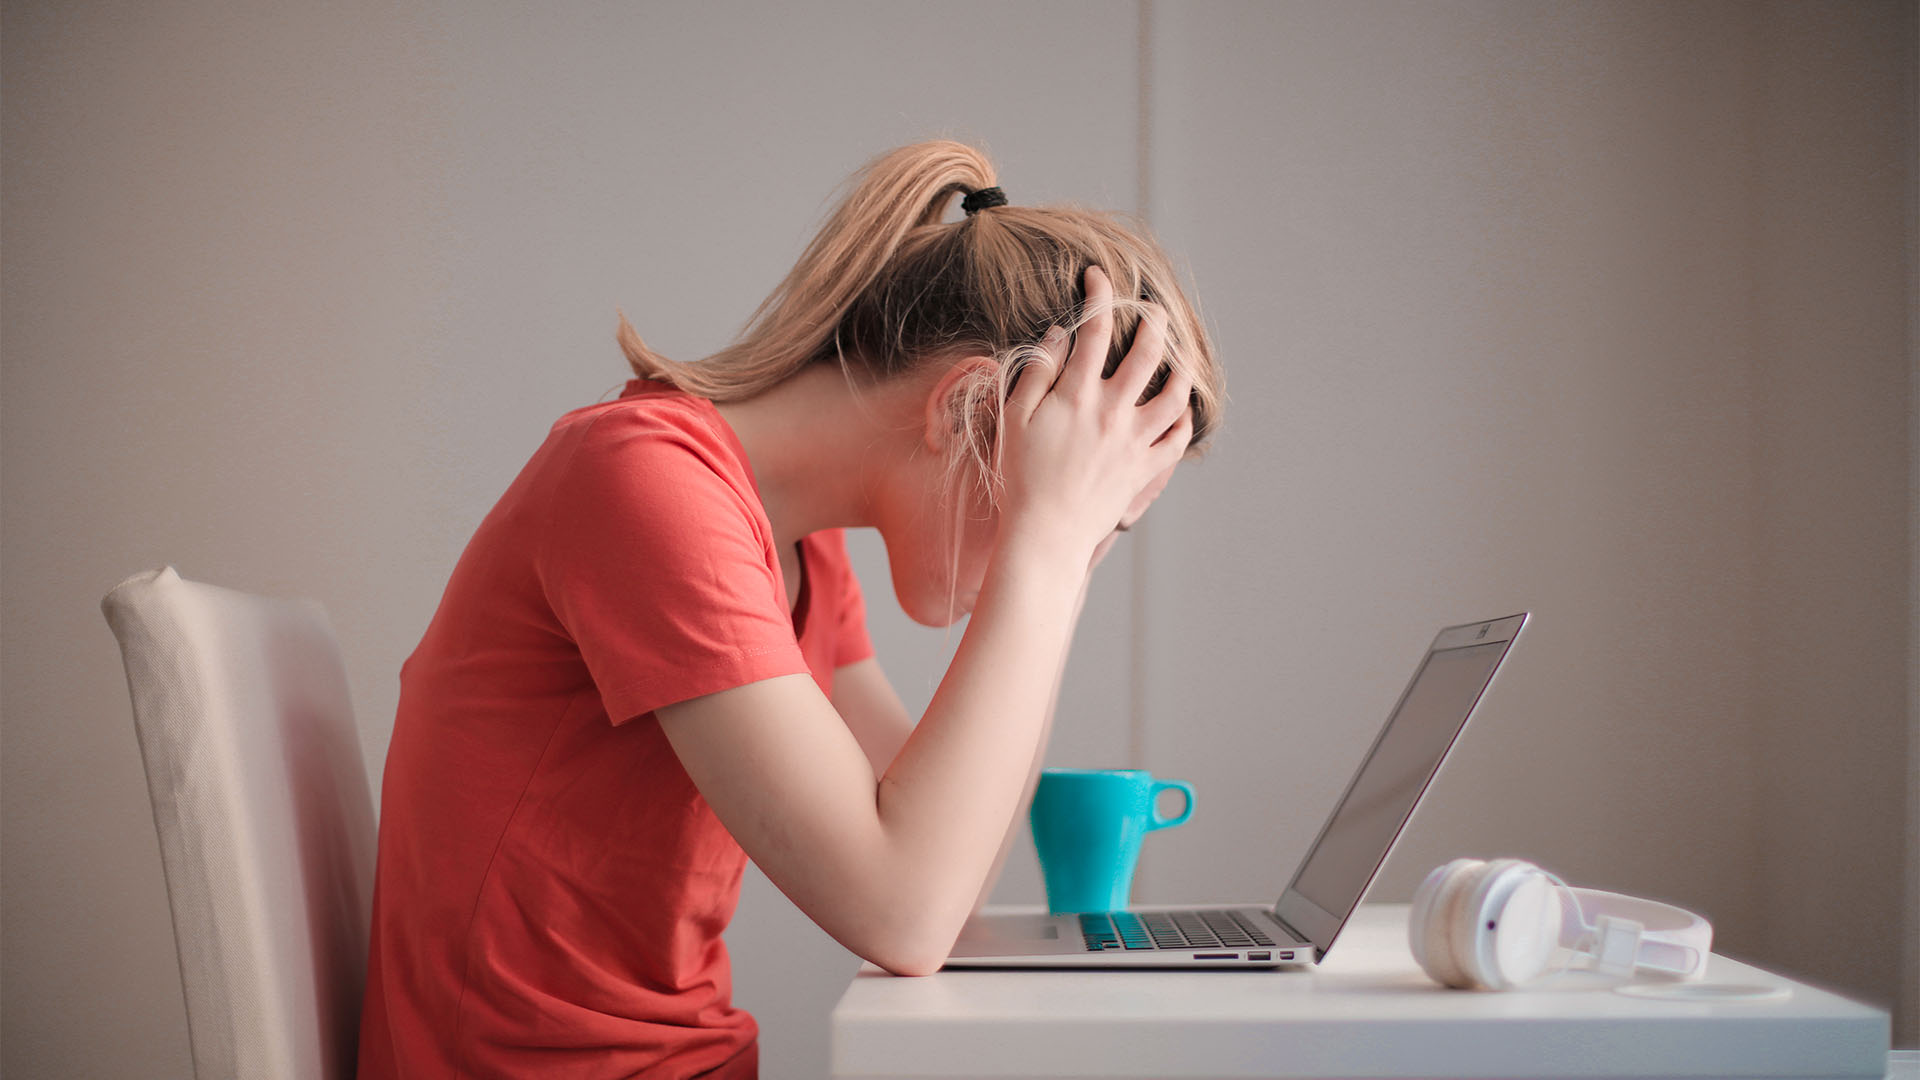 A college student sitting in front of her laptop alone, holding her head with hands.